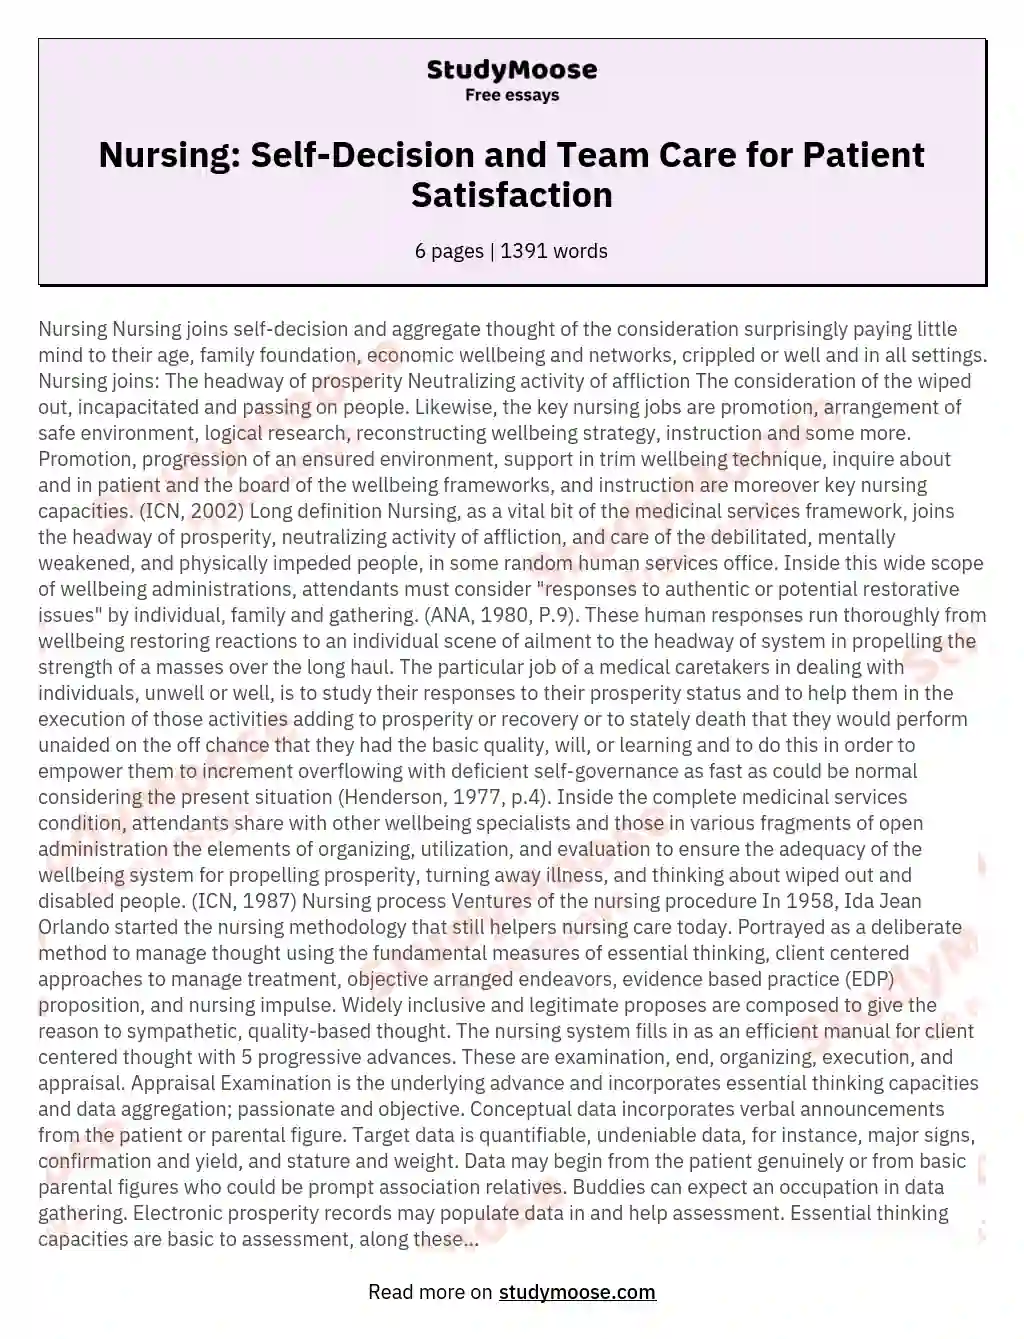 Nursing: Self-Decision and Team Care for Patient Satisfaction essay